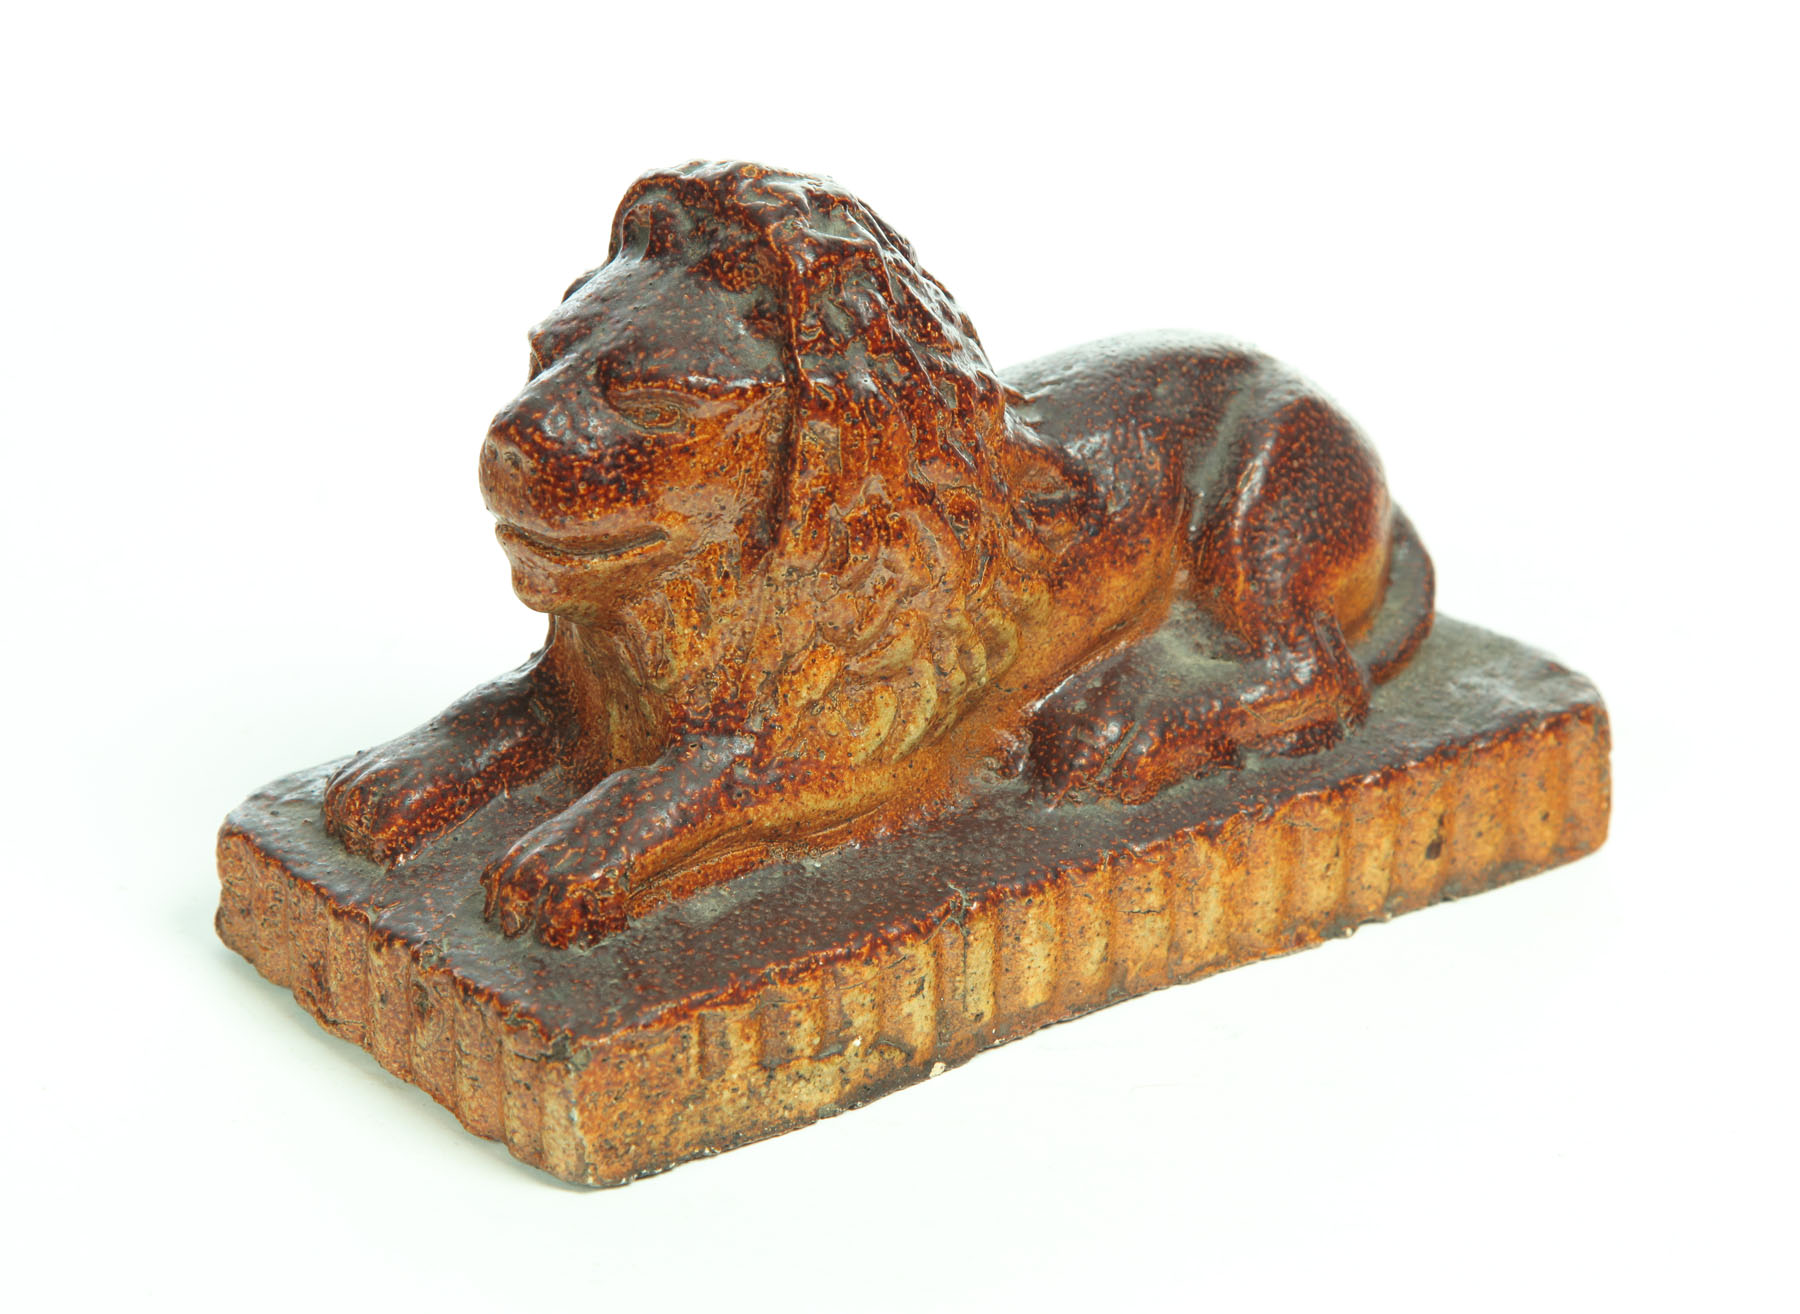 SEWERTILE LION Ohio early 20th 123836